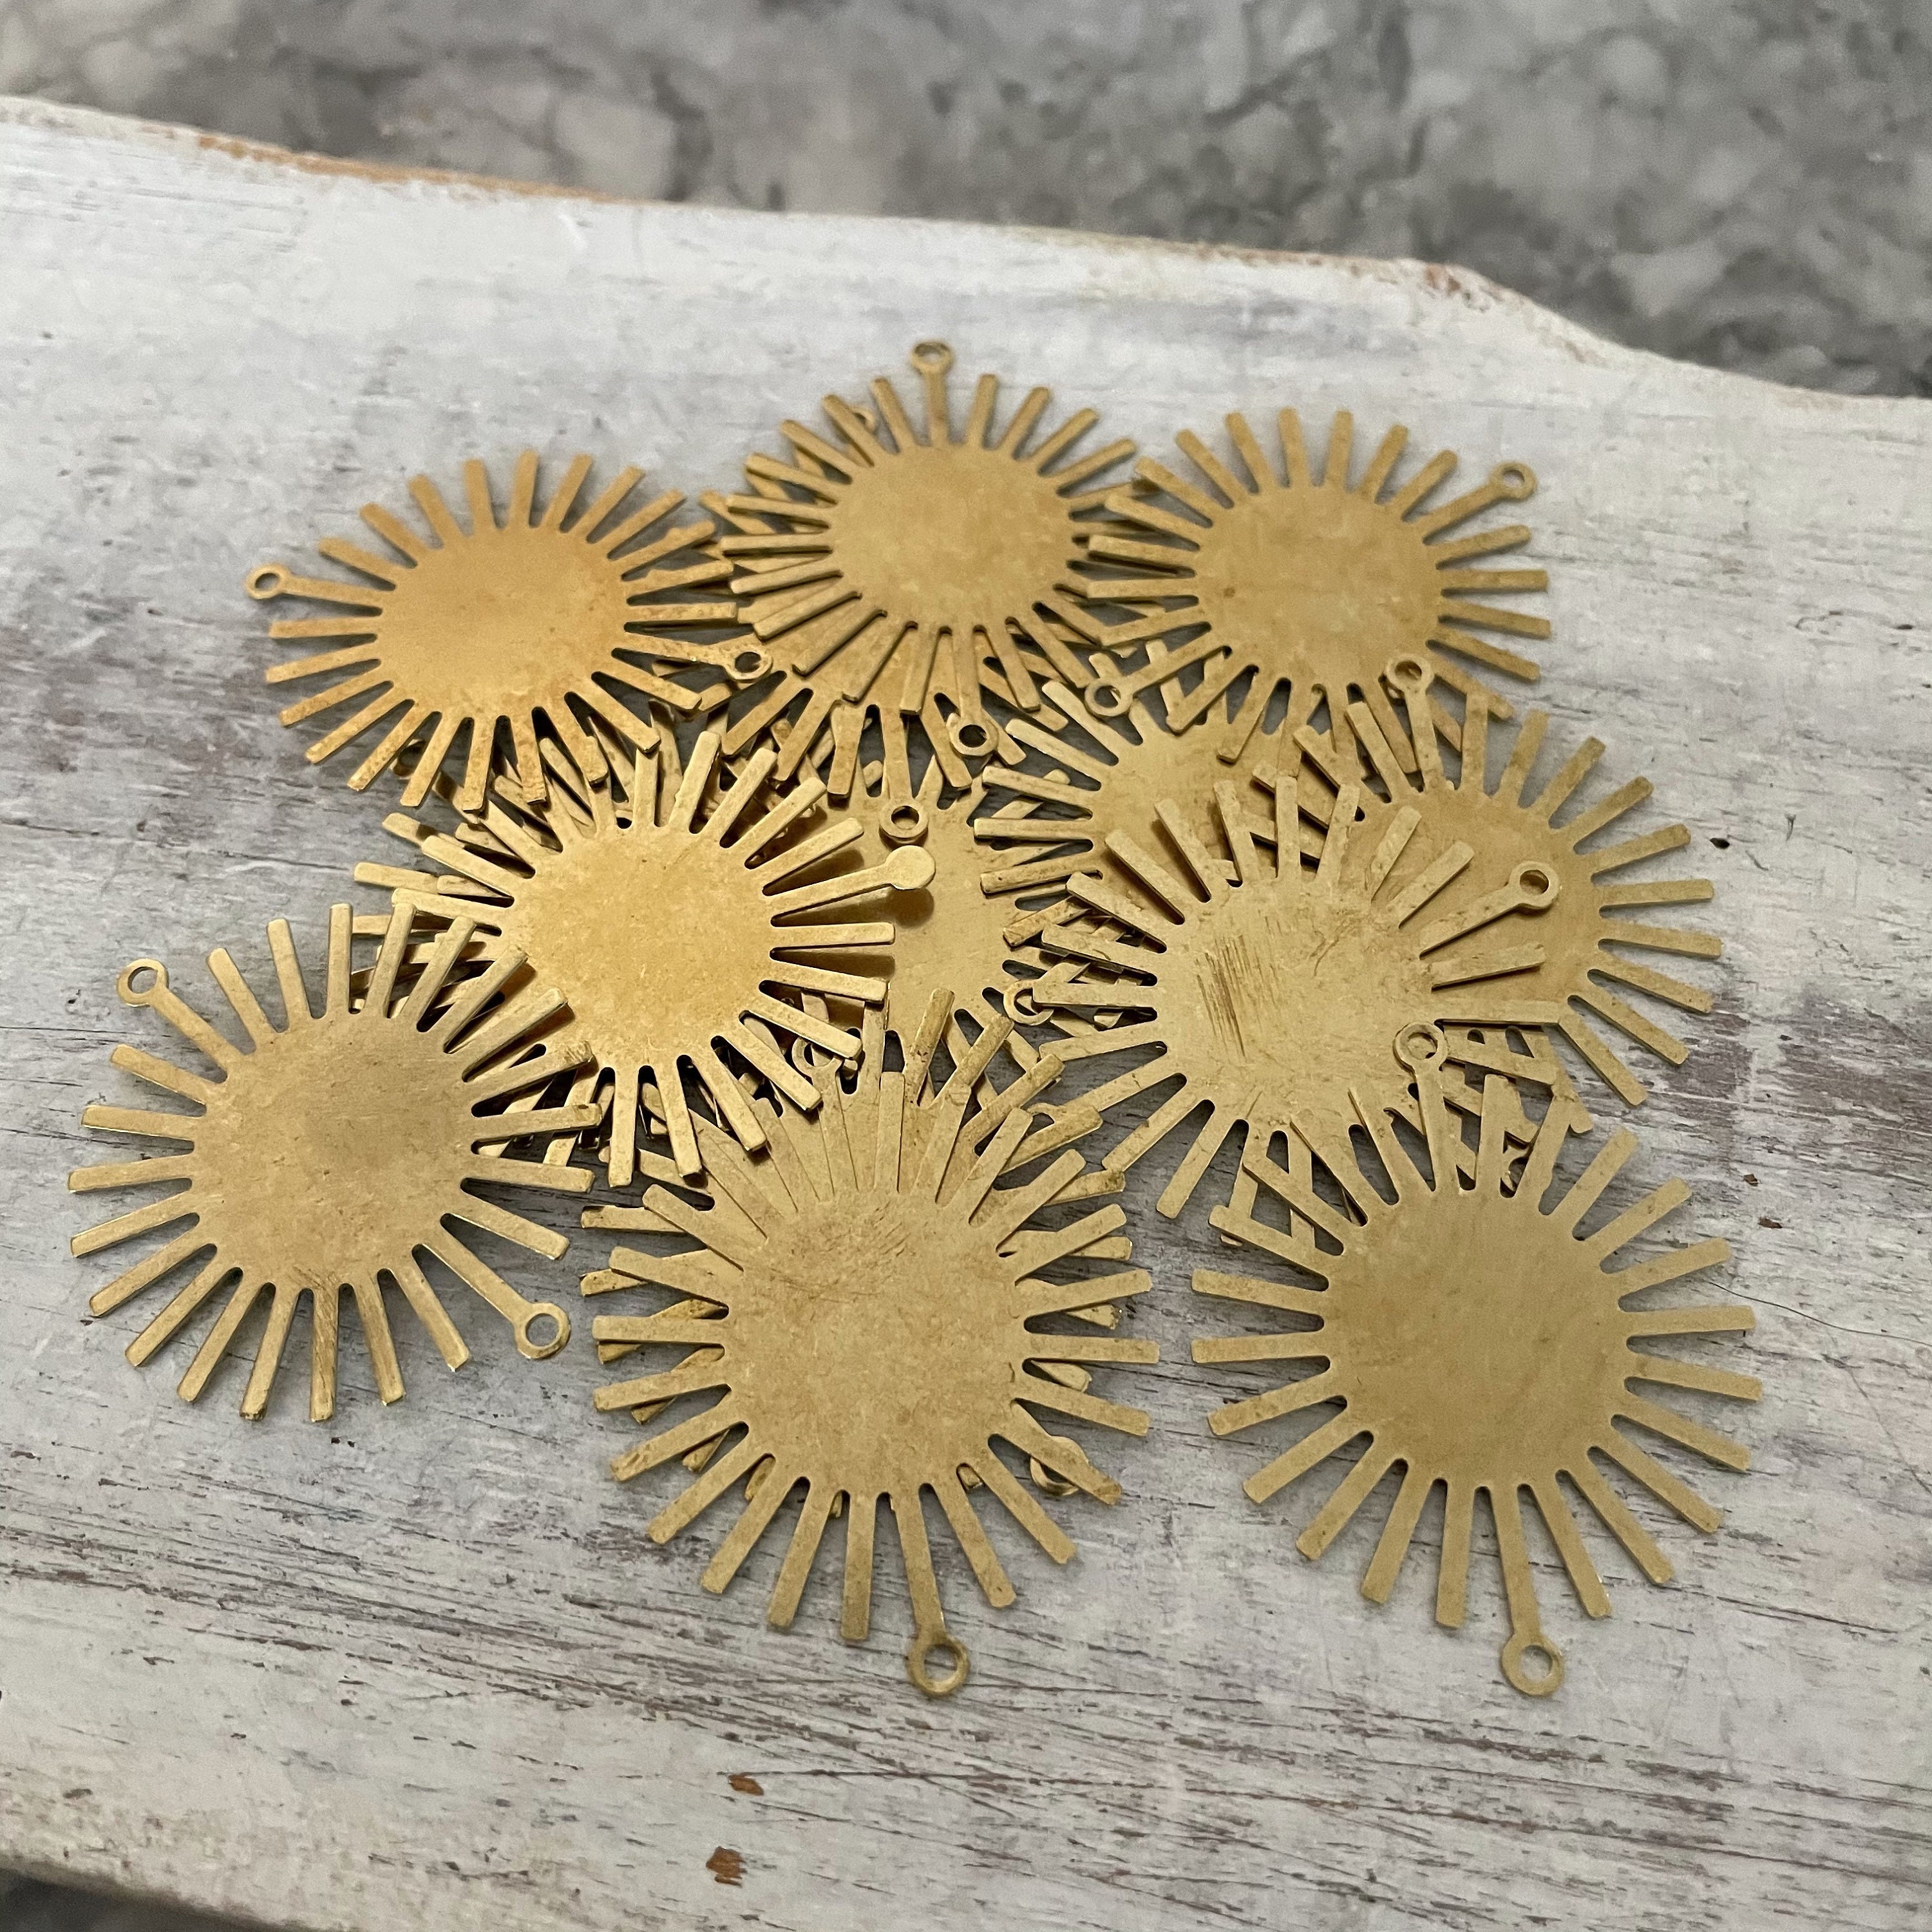 88 PCS - Raw Brass Earring Findings-One set, endless possibilities.  Wholesale earring findings for jewelry making parts. No Plated/Coated